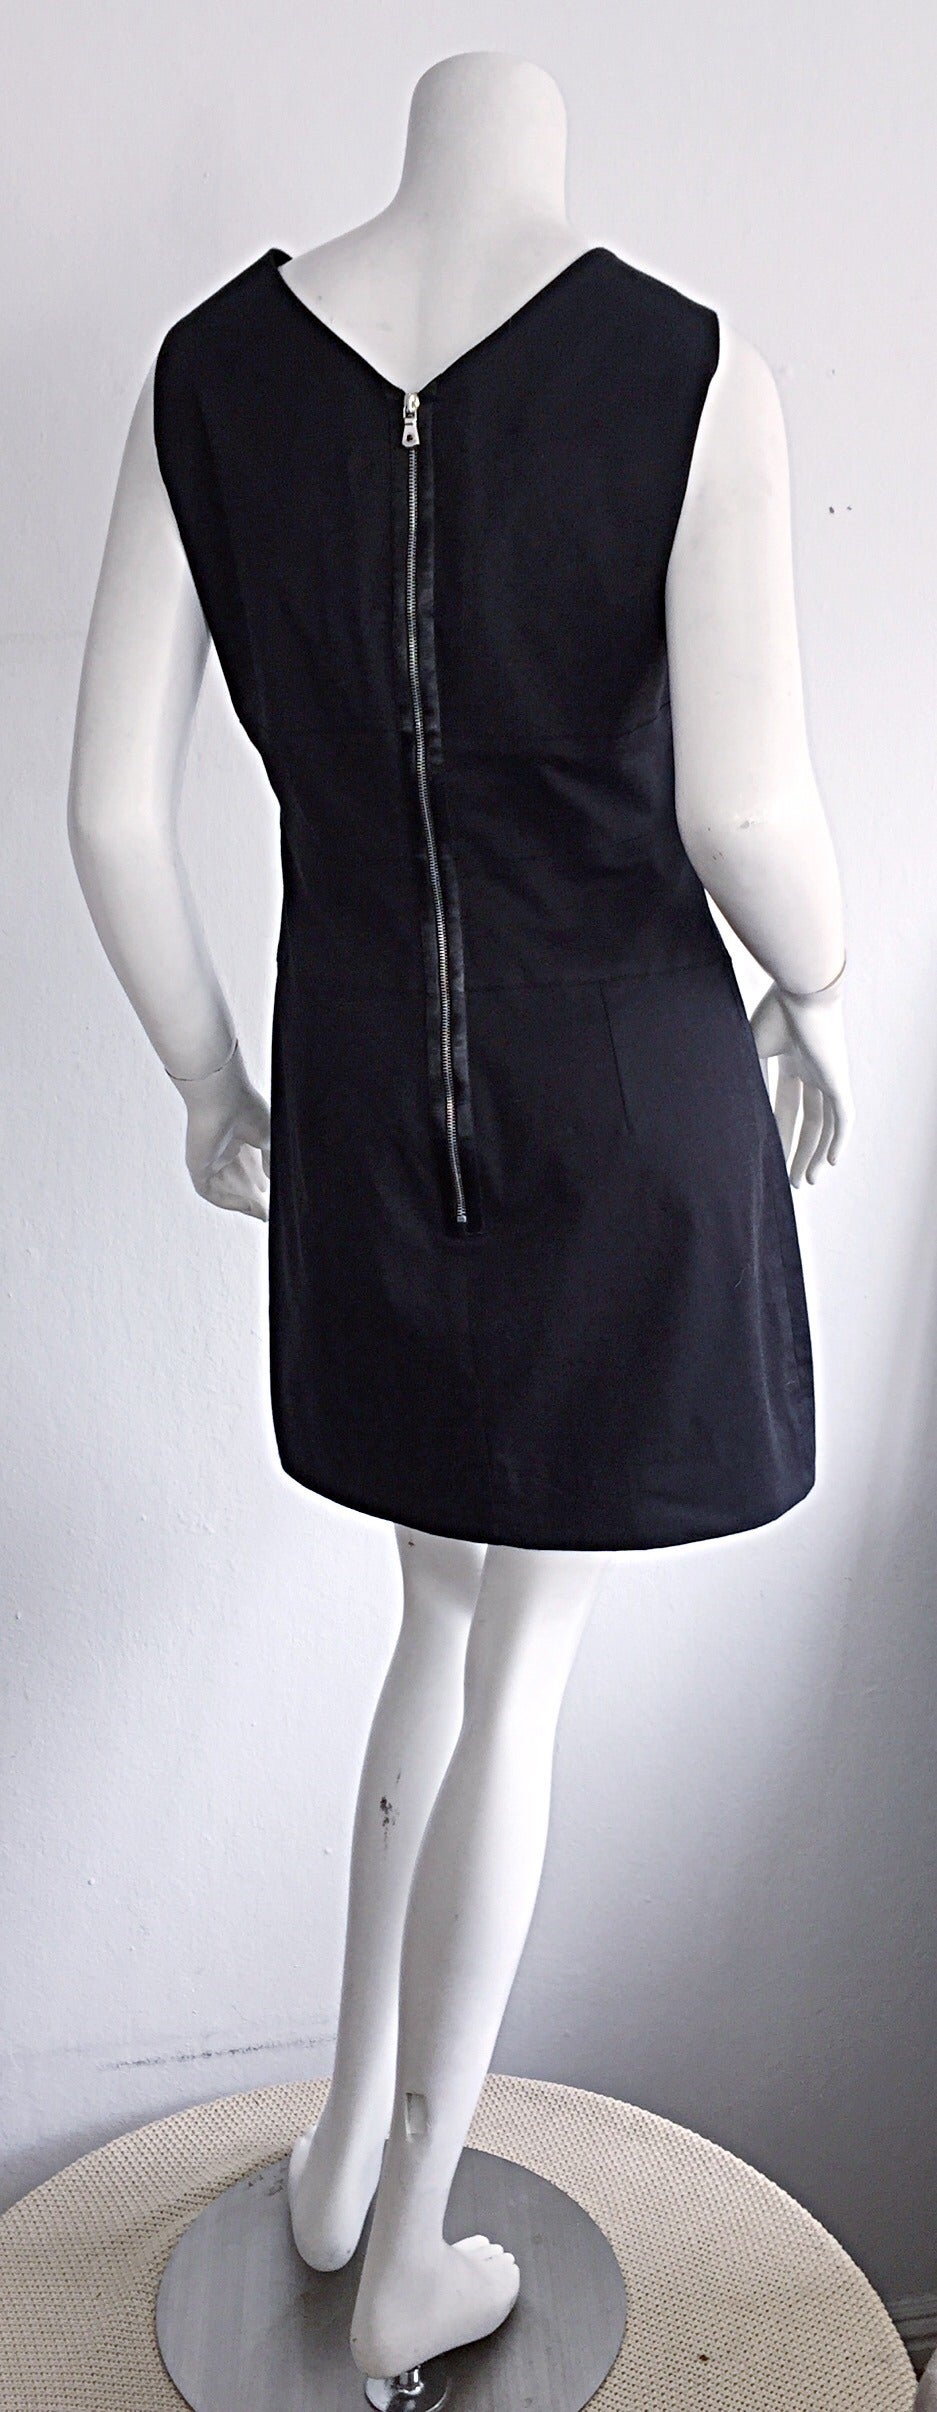 The PERFECT little black dress! 1990s Dolce & Gabbana cotton stretch dress, with exposed silver metal zipper detail on back. Figure flattering fit. This will most definitely be your new 'go-to' LBD (little black dress)! Easily transitions from day